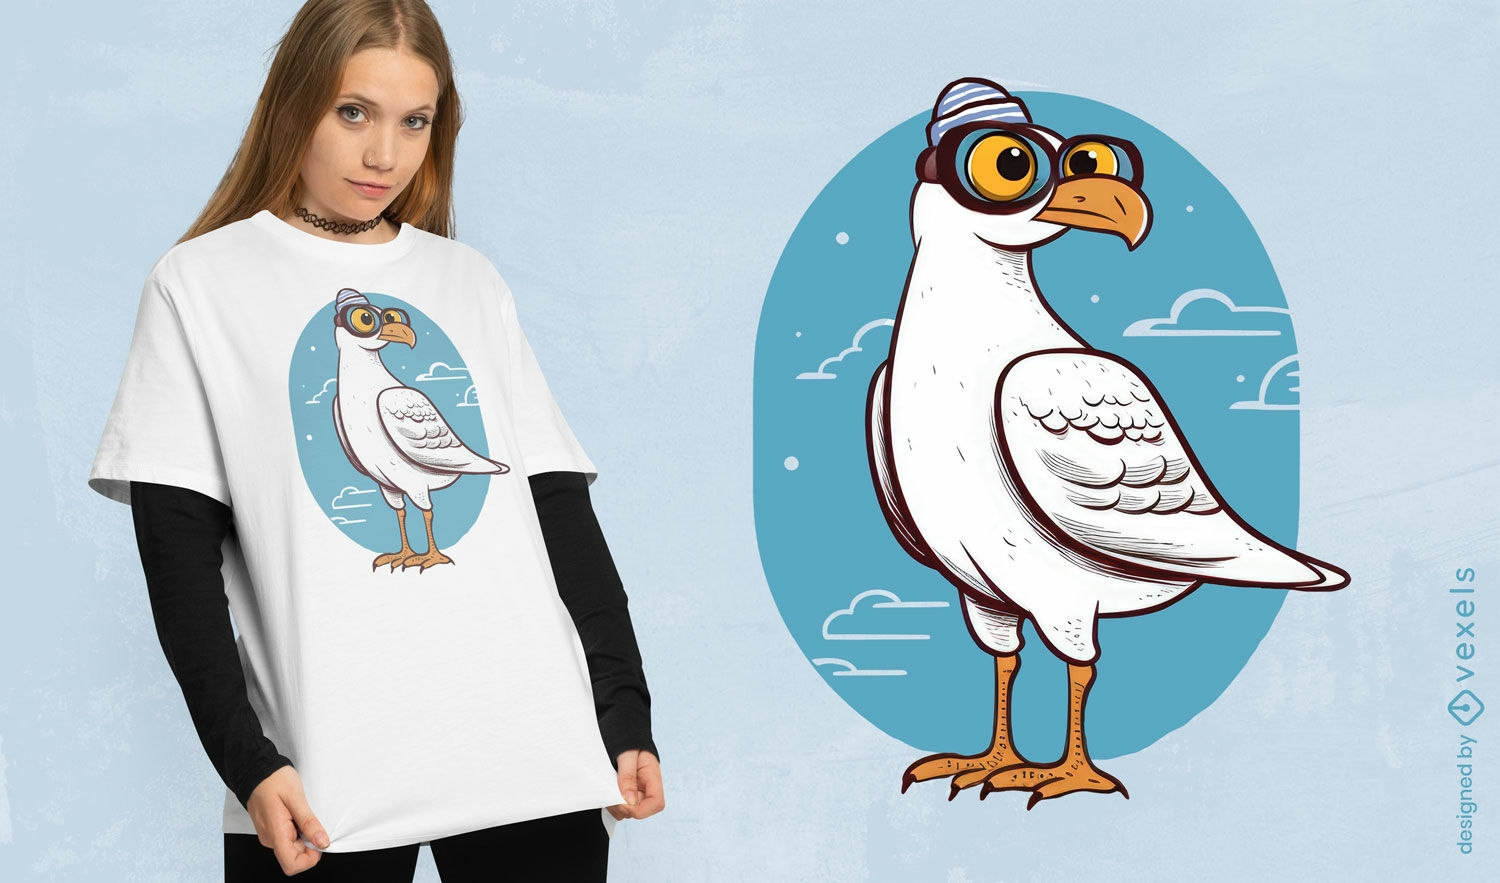 Seagull with eyeglasses character t-shirt design